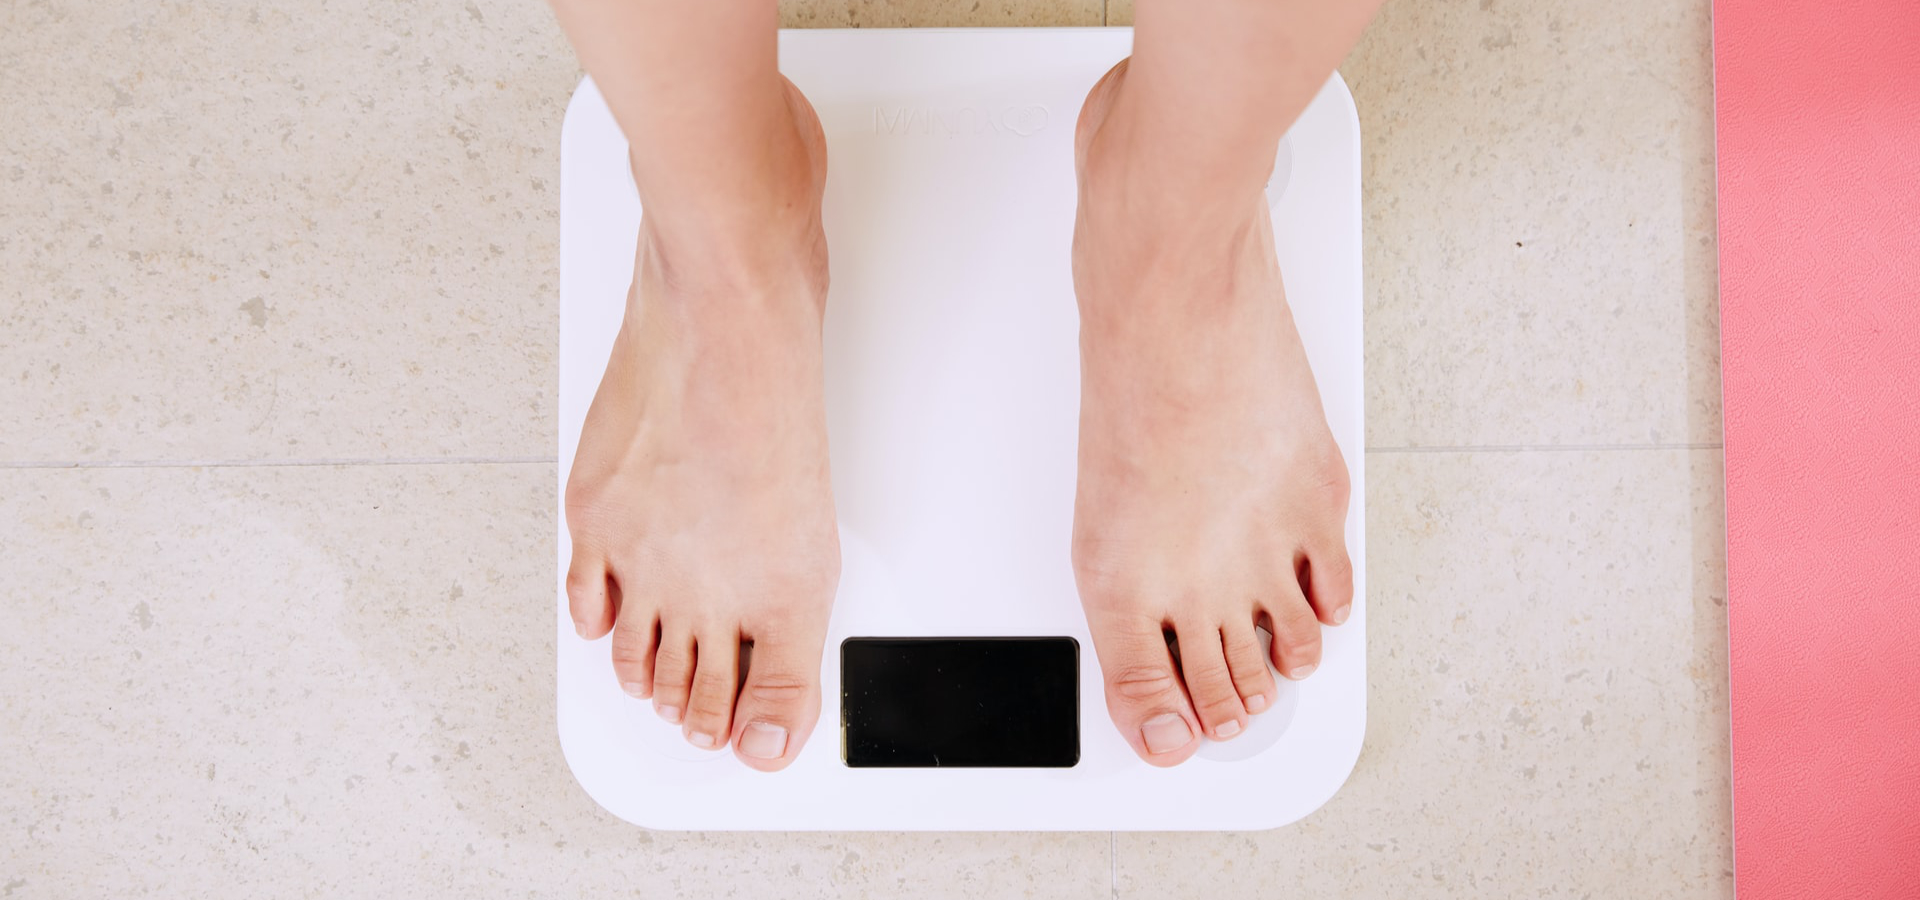 Does metabolically healthy obesity exist or is it just a matter of time?